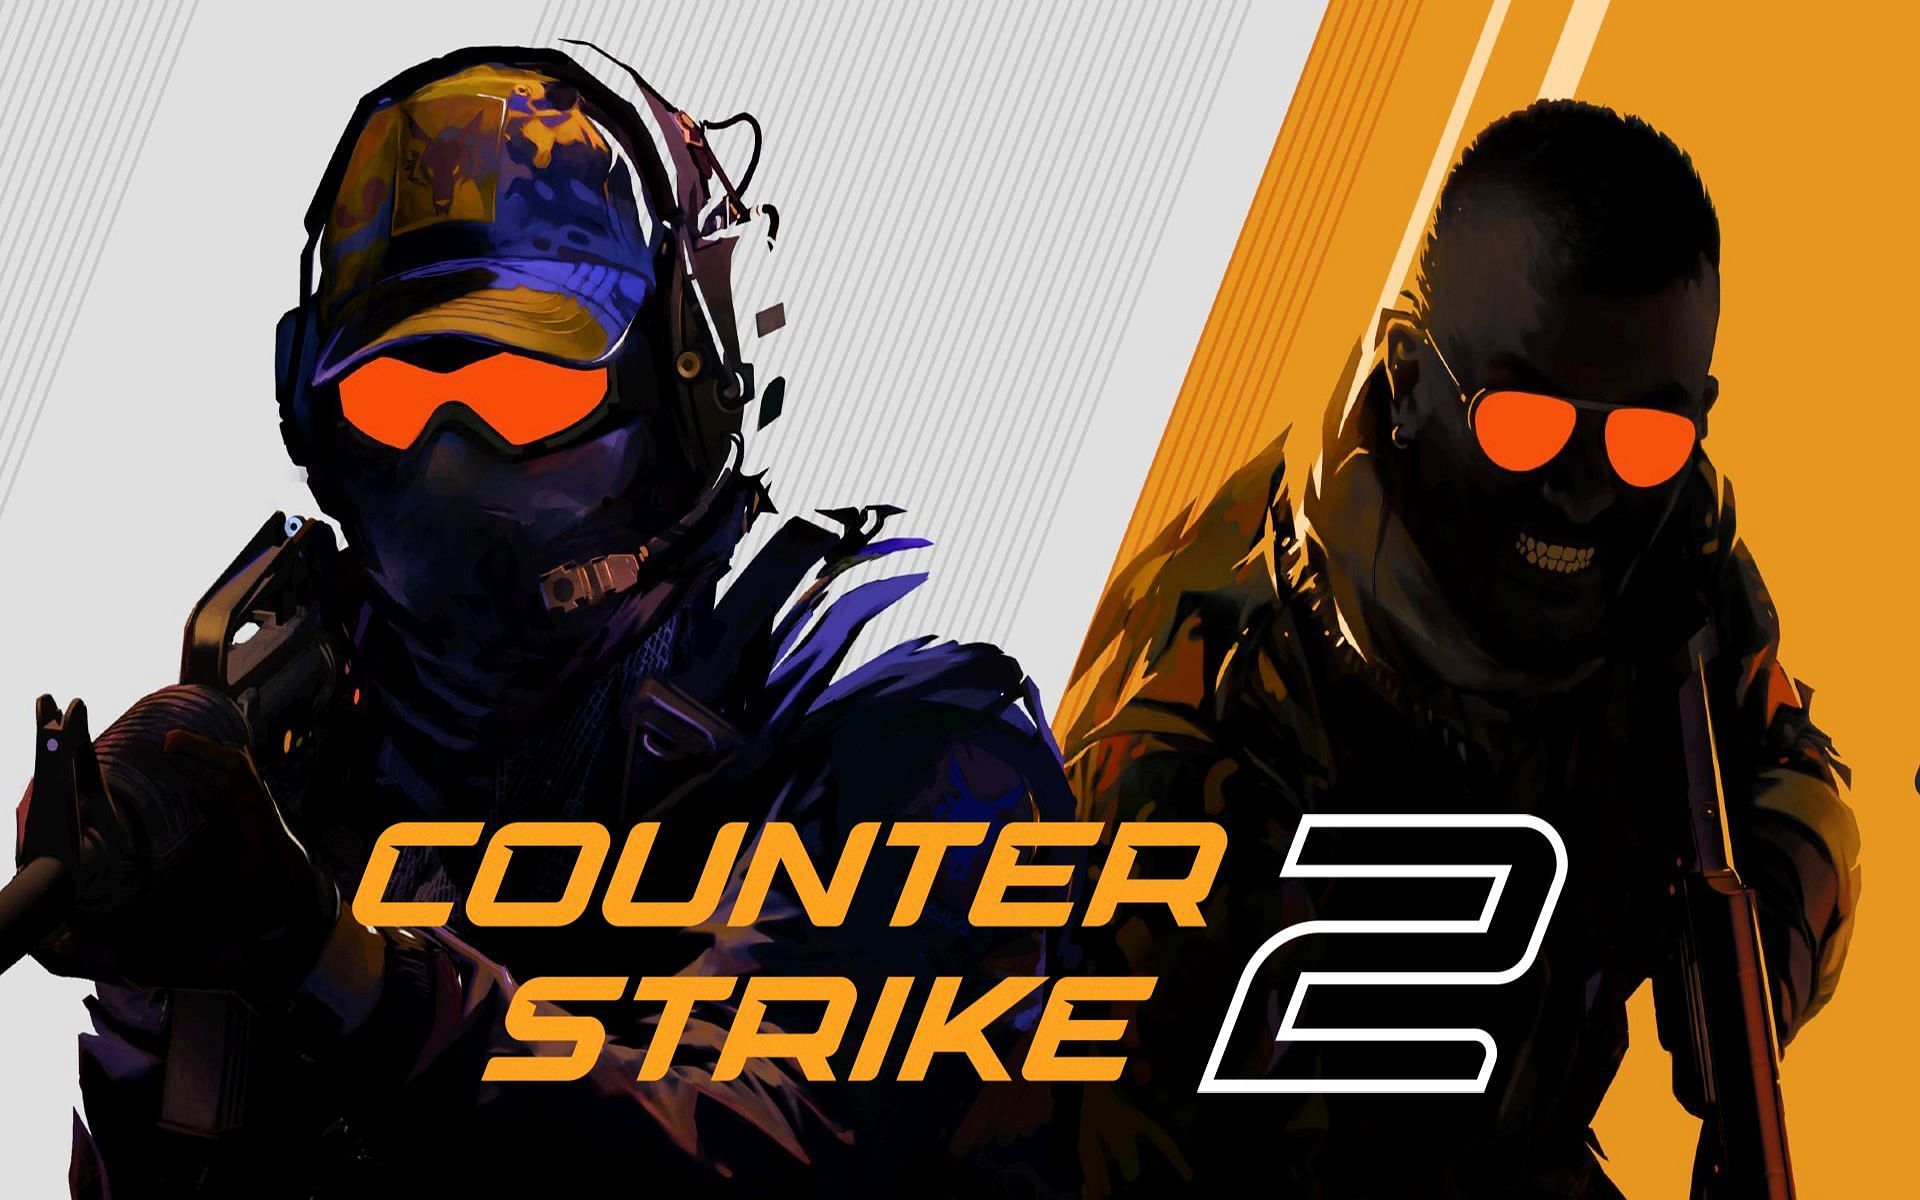 Counter-Strike 2 developers alert players of scammers (Image via Valve)